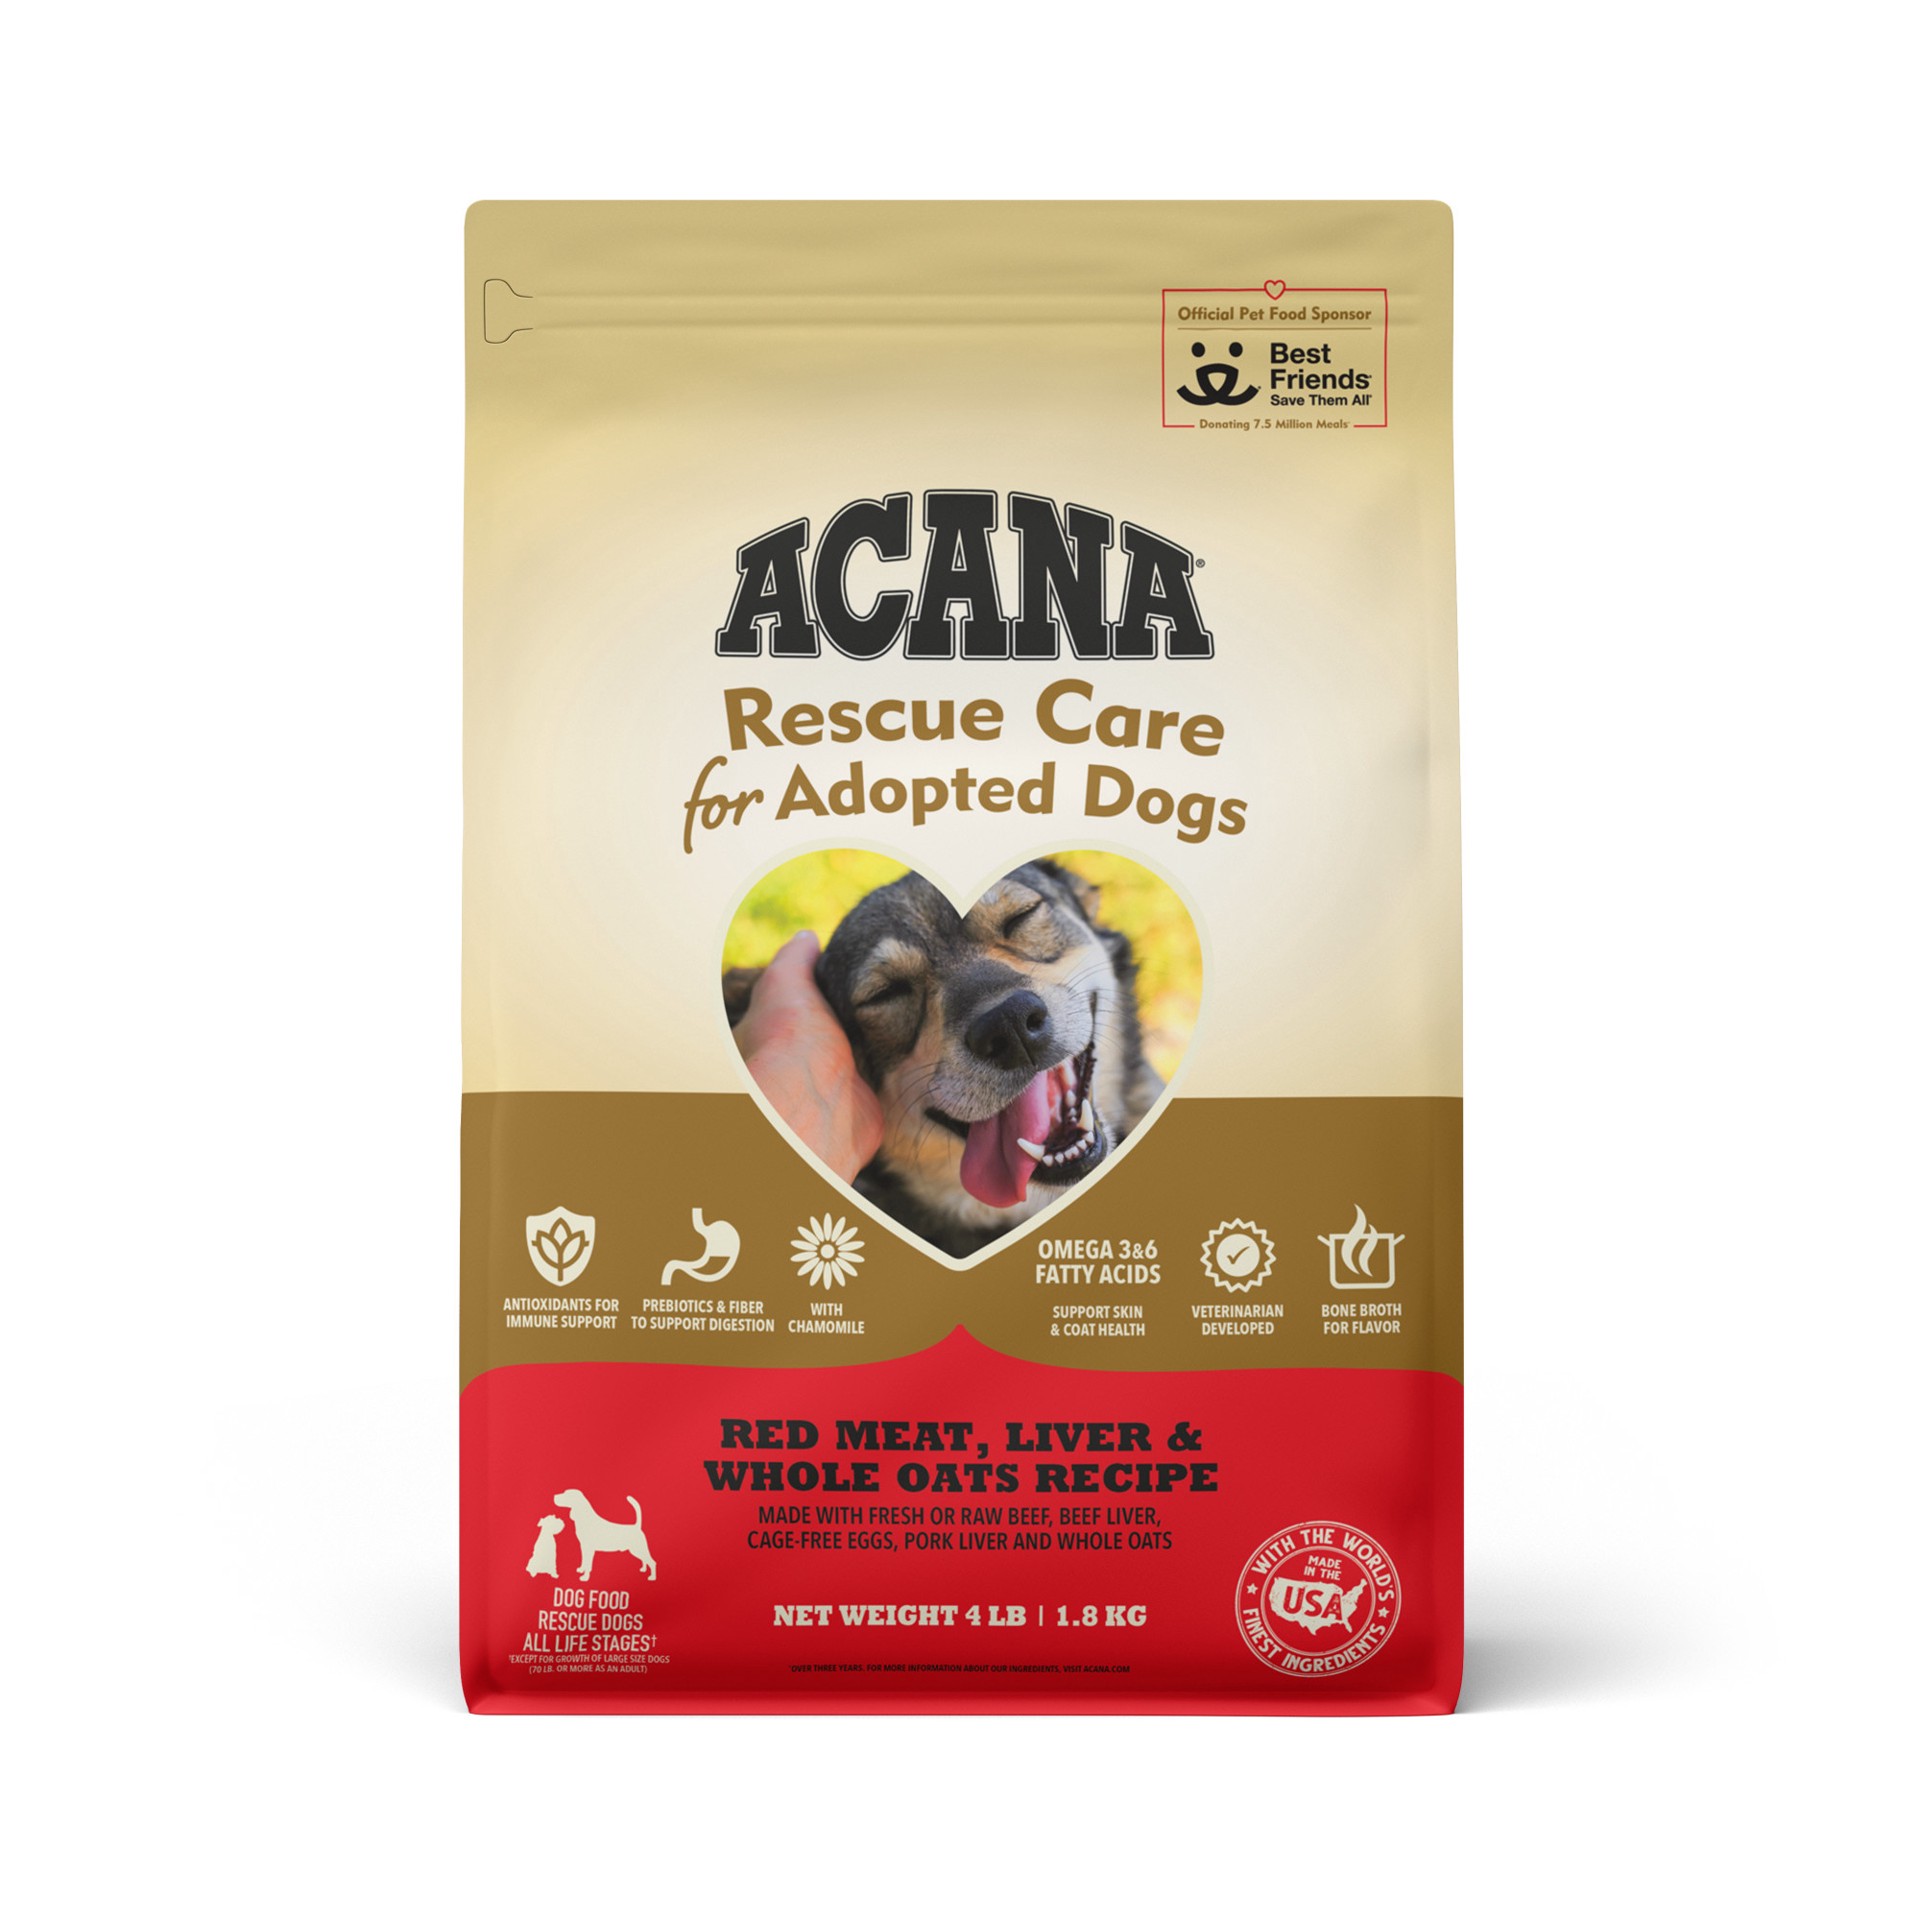 slide 1 of 5, ACANA Rescue Care for Adopted Dogs Red Meat, Liver & Whole Oats Recipe 4lb, 4 lb